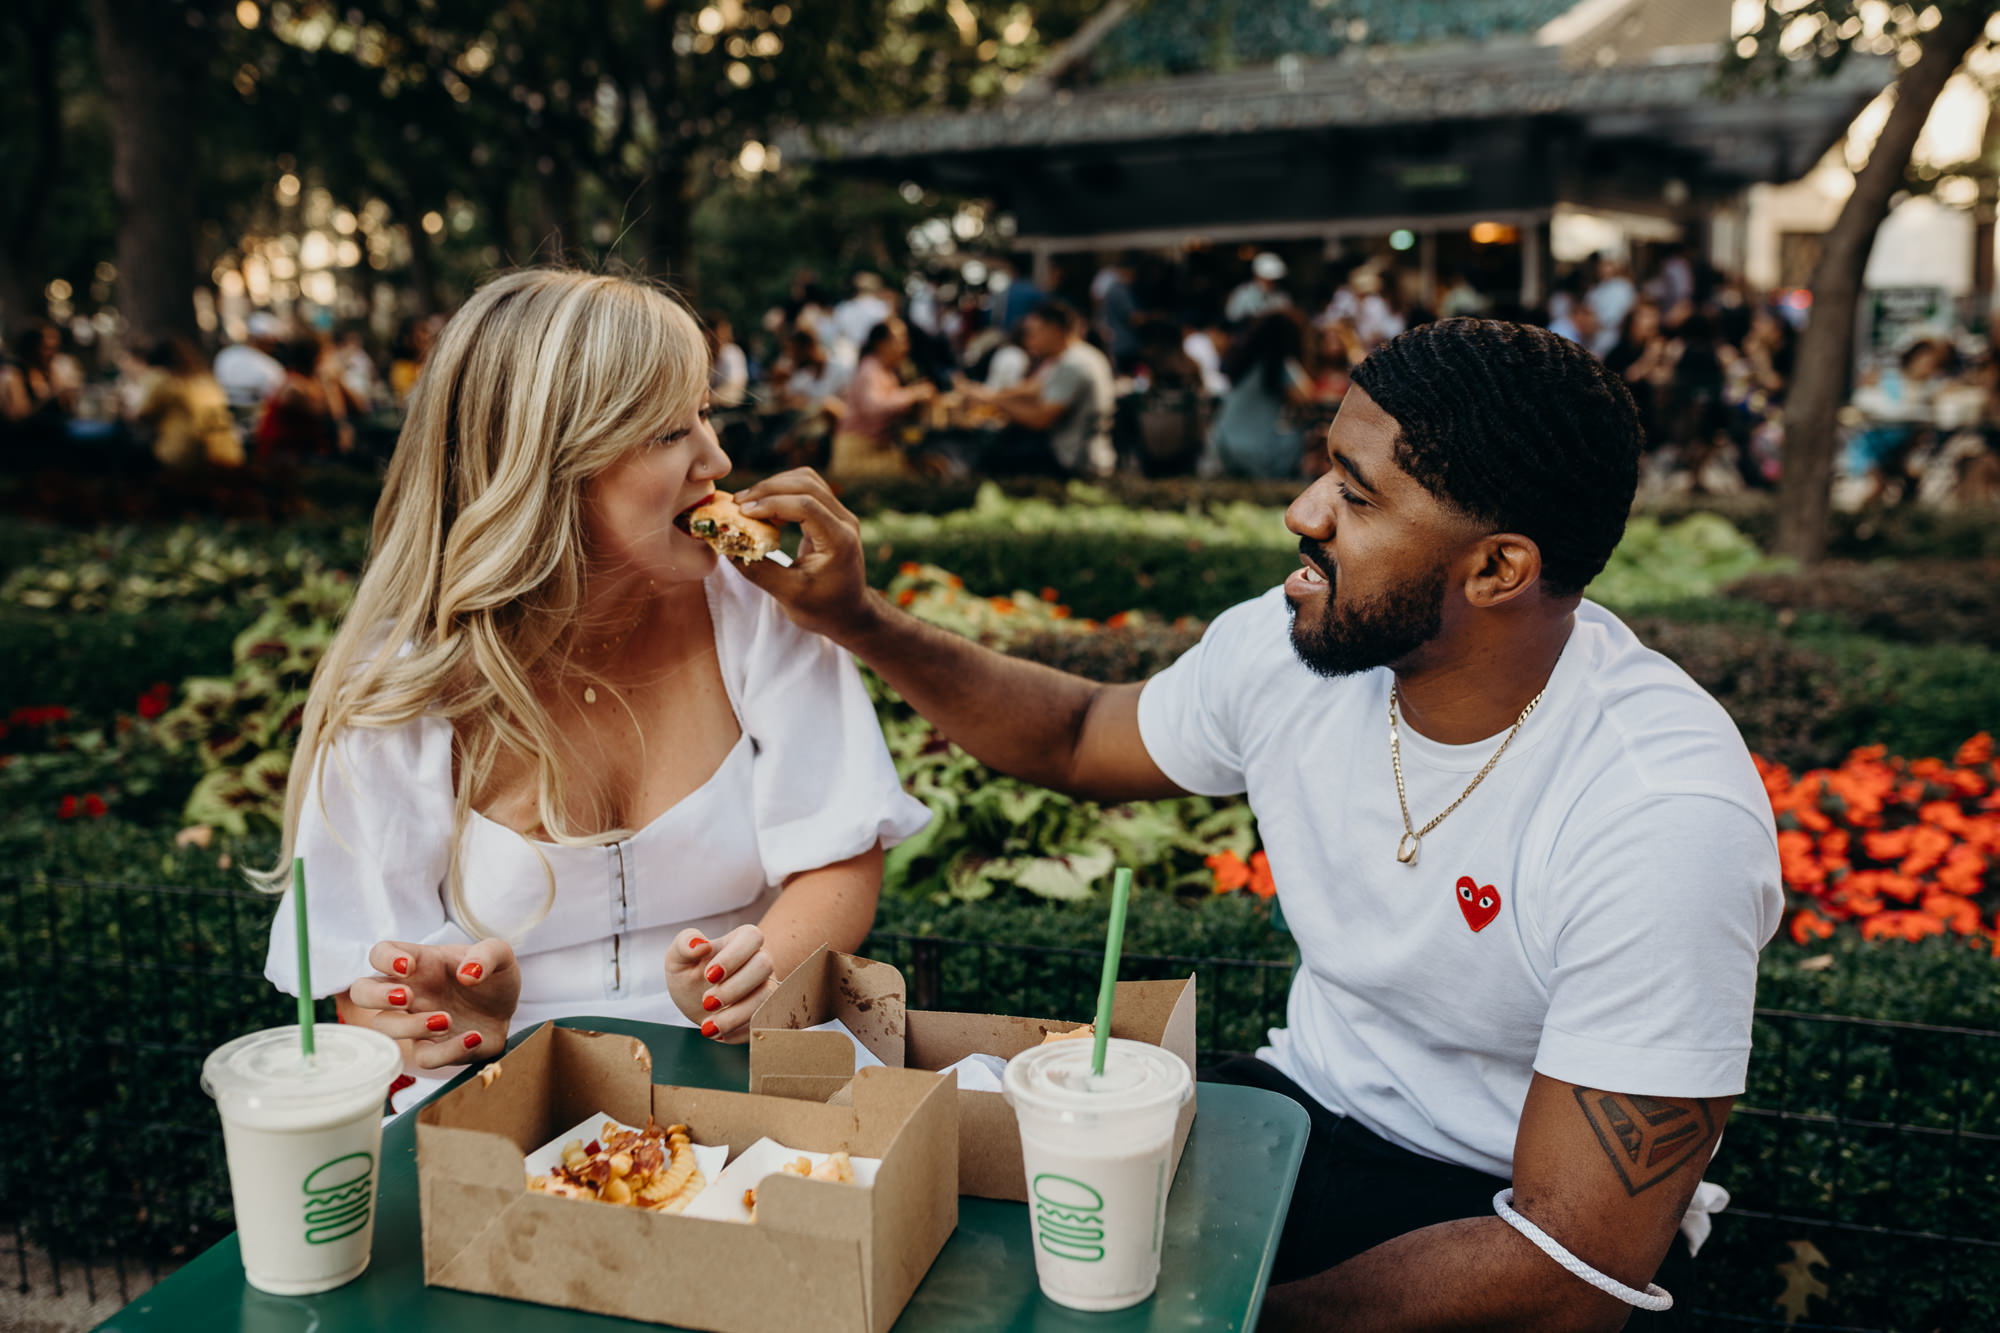 engagement session at shake shack in madison square park, manhattan, nyc